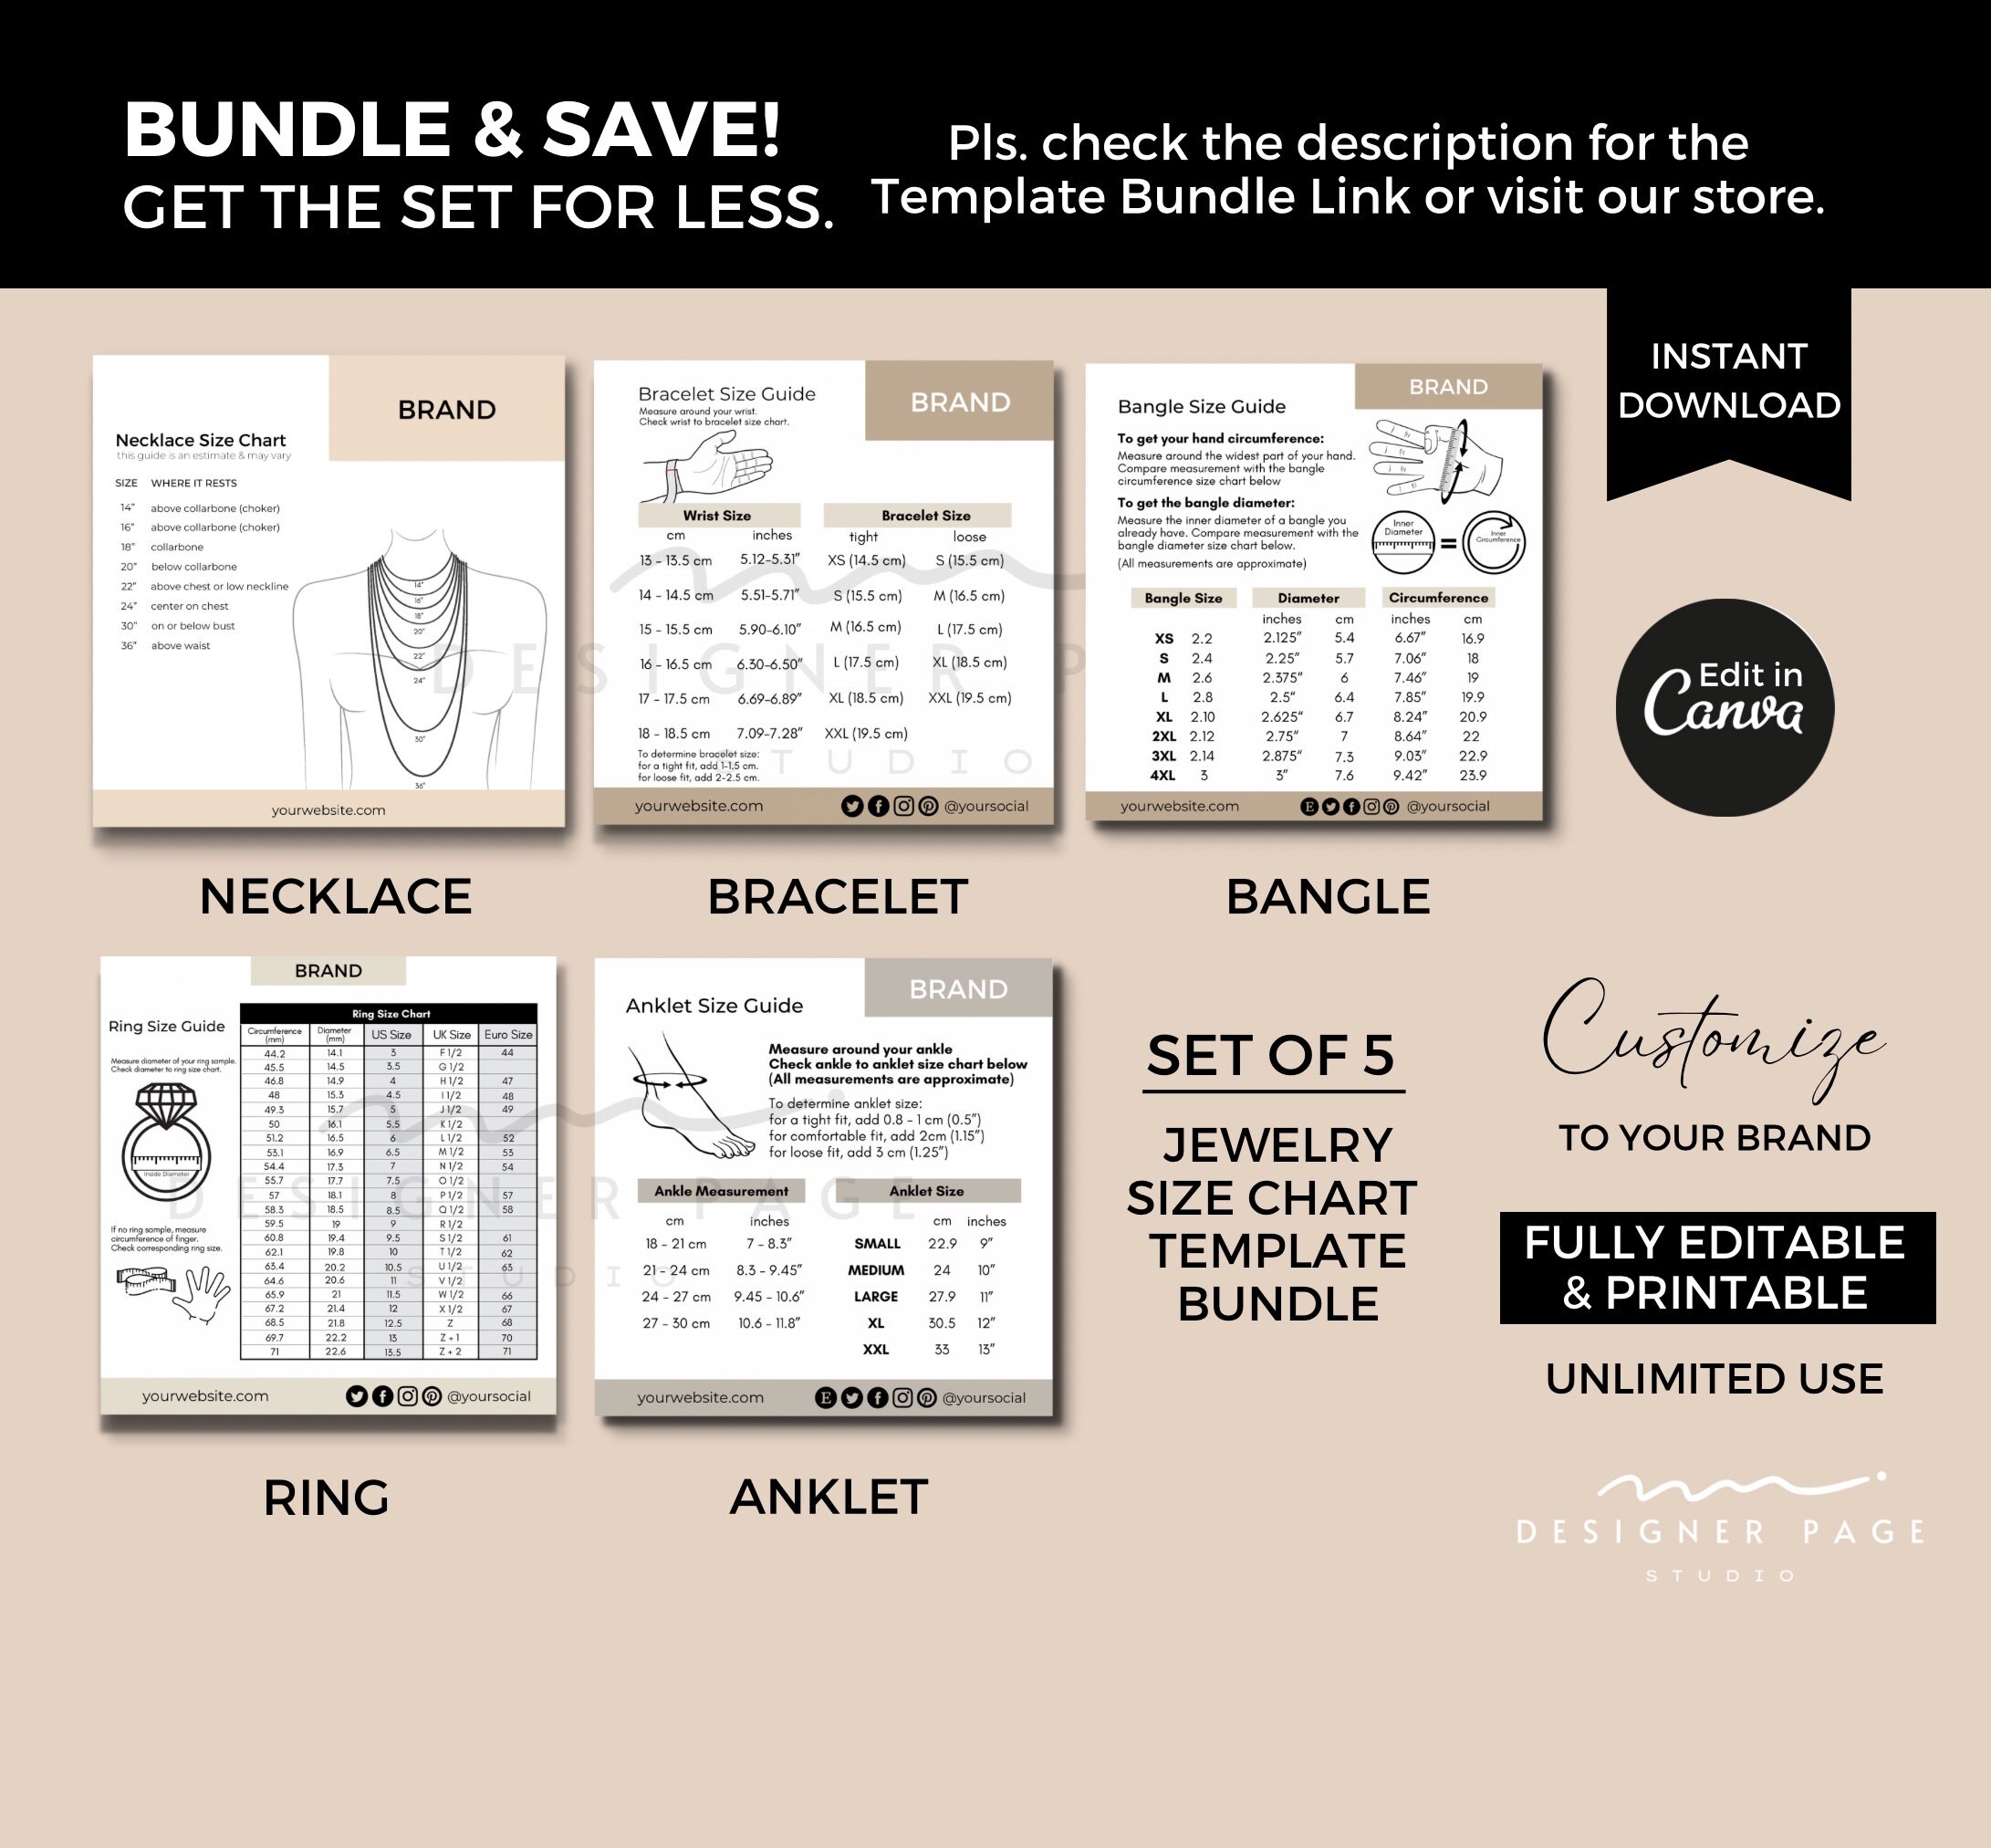 FREE Ring Size Chart Templates & Examples - Edit Online & Download